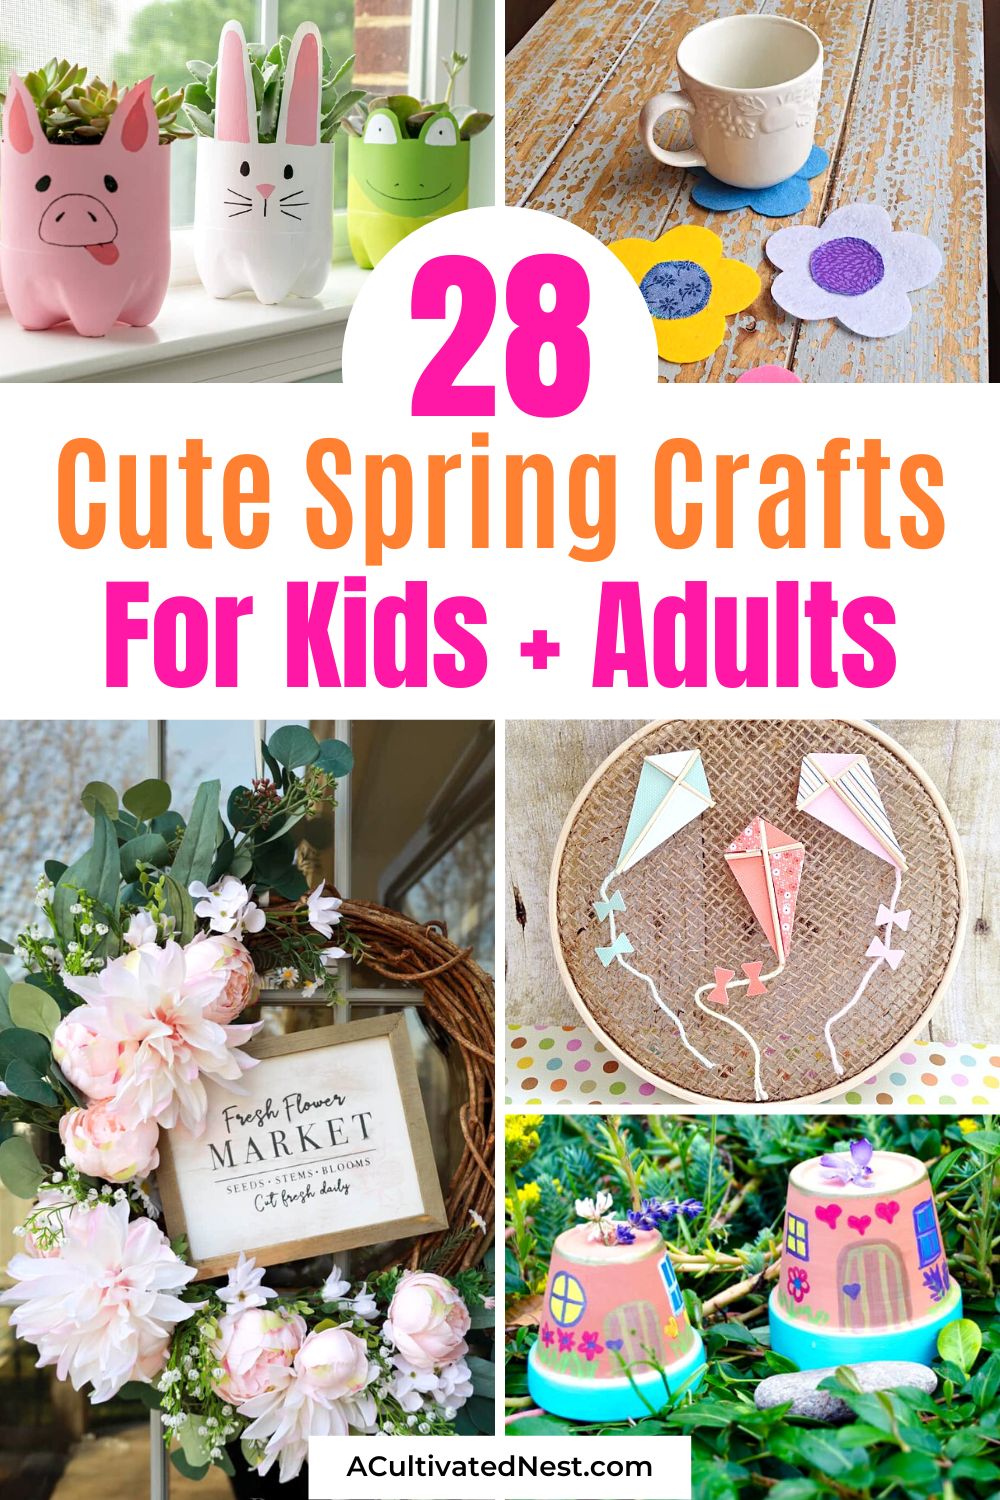 28 Cute Crafts for Spring- Celebrate the season with cute spring crafts! Whether you're crafting with kids or enjoying some solo creativity, these ideas will fill your home with joy and color. | #springCrafts #springDecor #kidsActivities #diy #ACultivatedNest